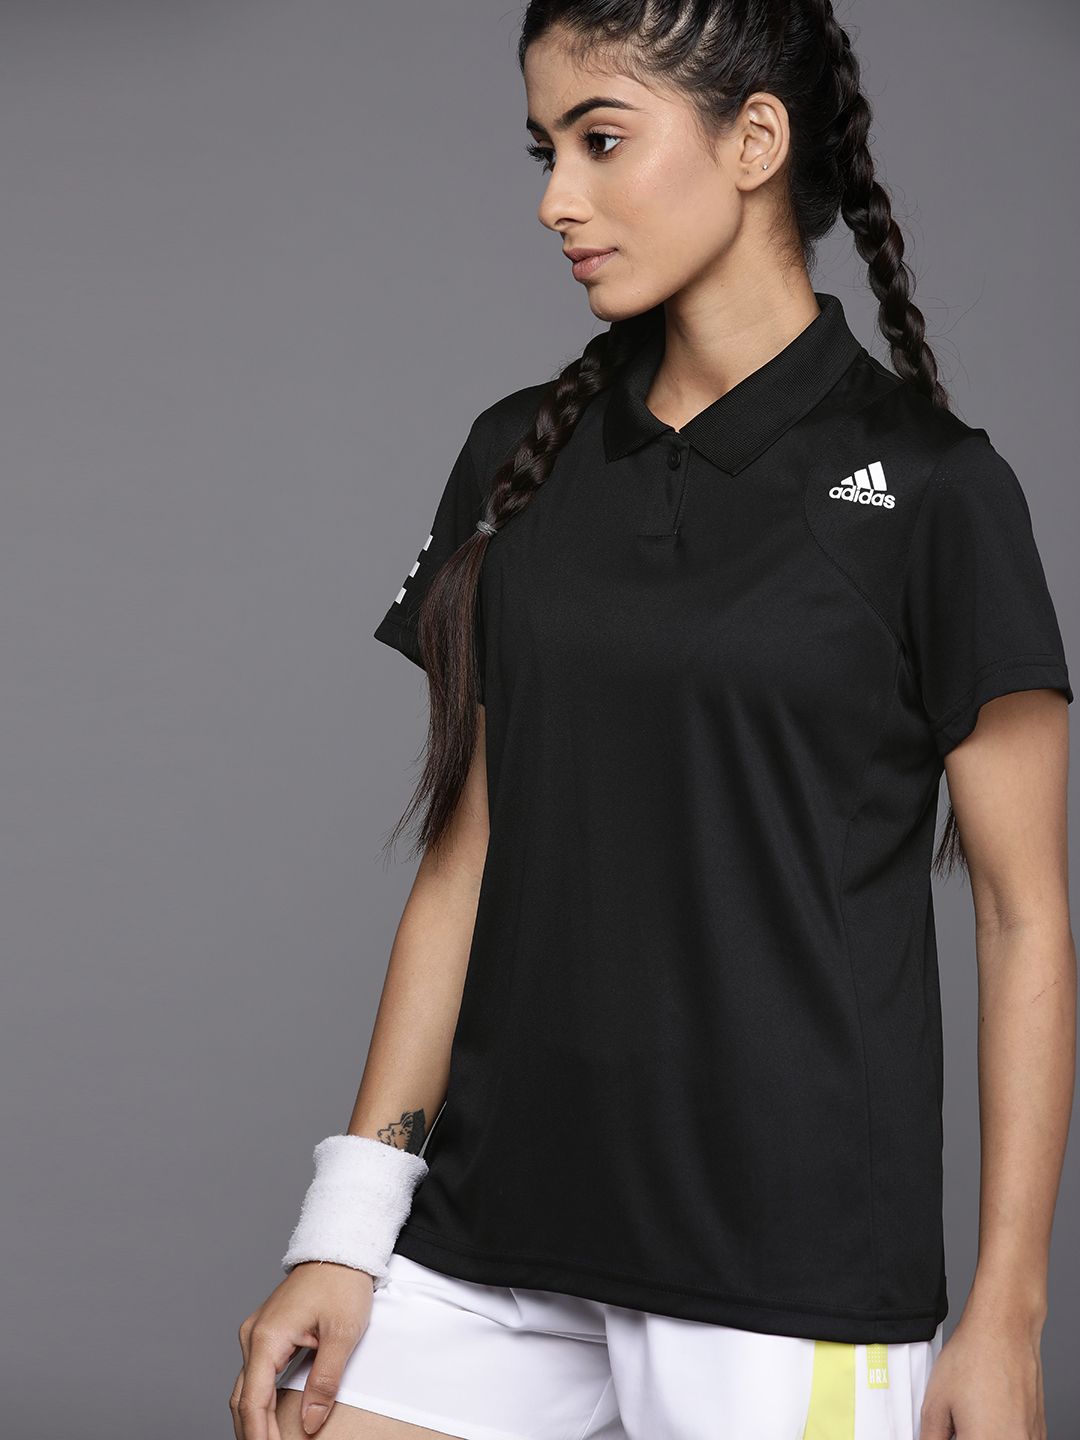 ADIDAS Women Black Solid Perforated Aeroready Polo Collar T-shirt Price in India